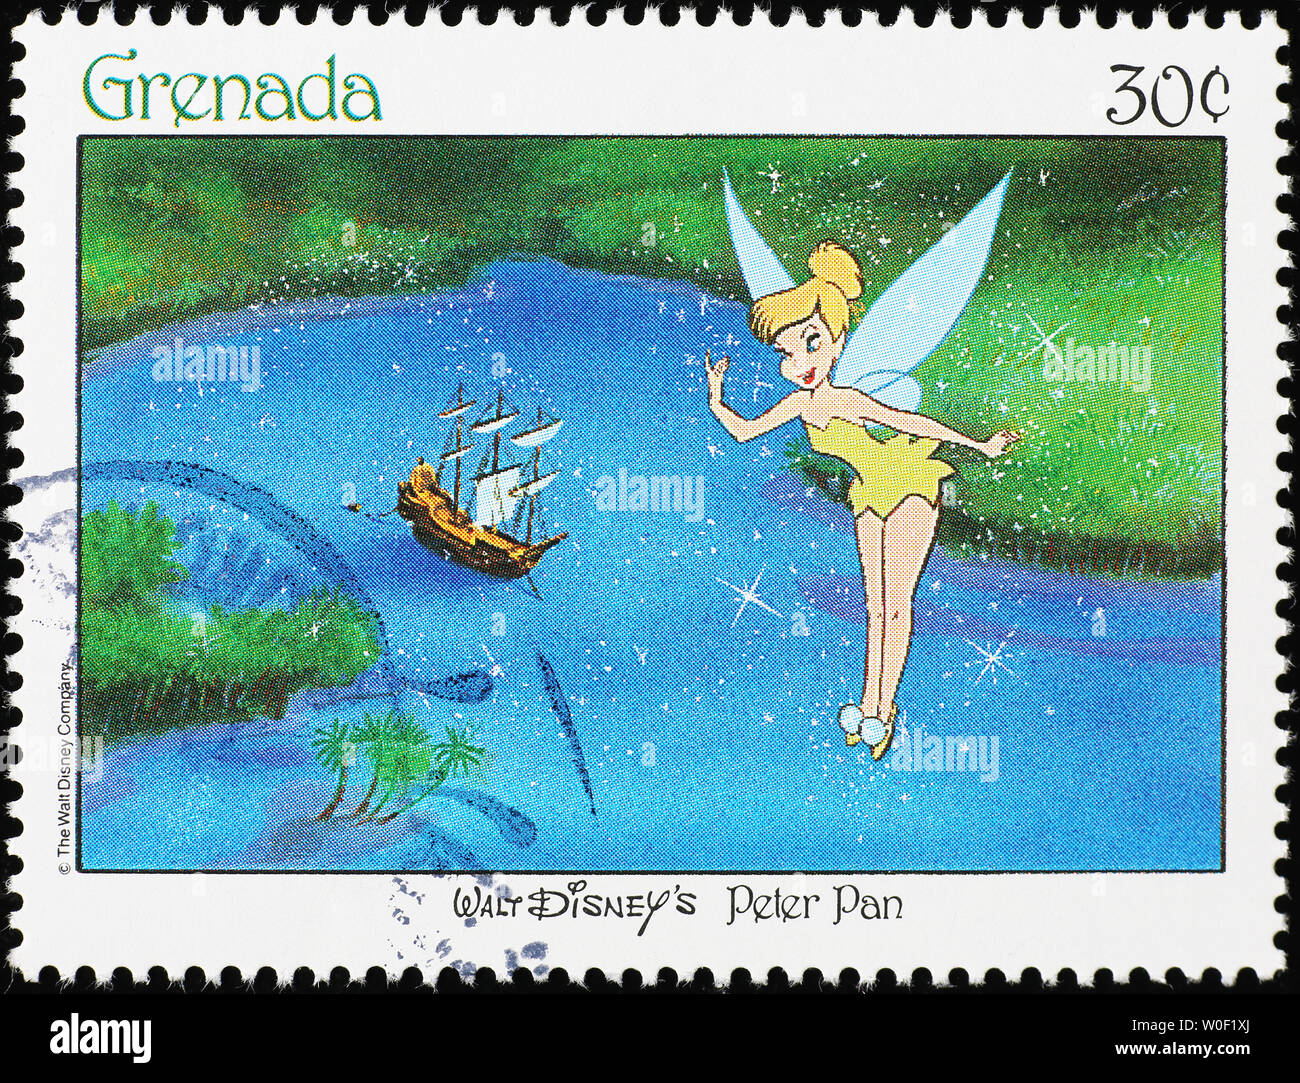 Tinker Bell of Peter Pan on postage stamp Stock Photo